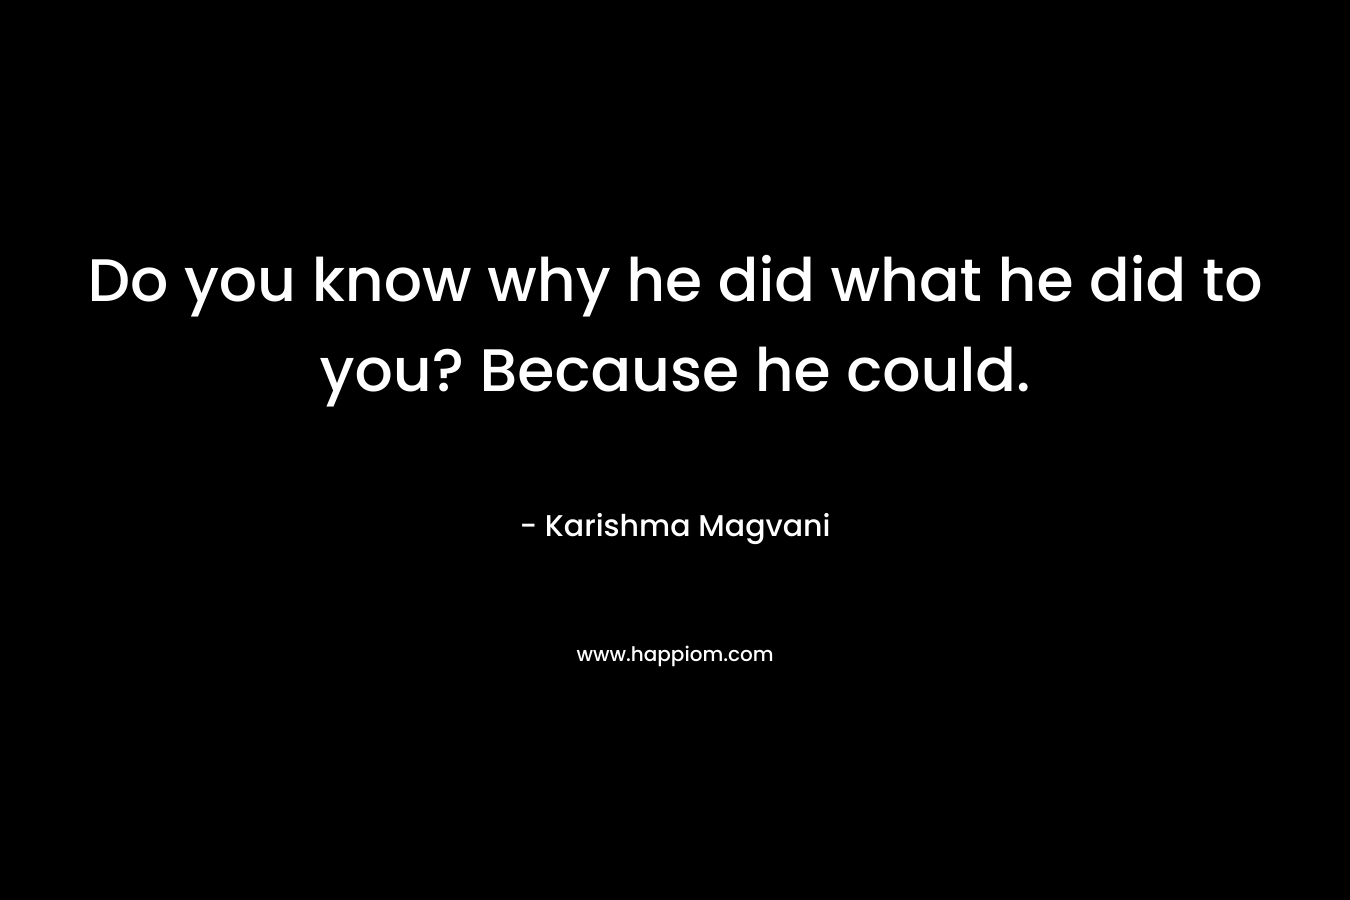 Do you know why he did what he did to you? Because he could.